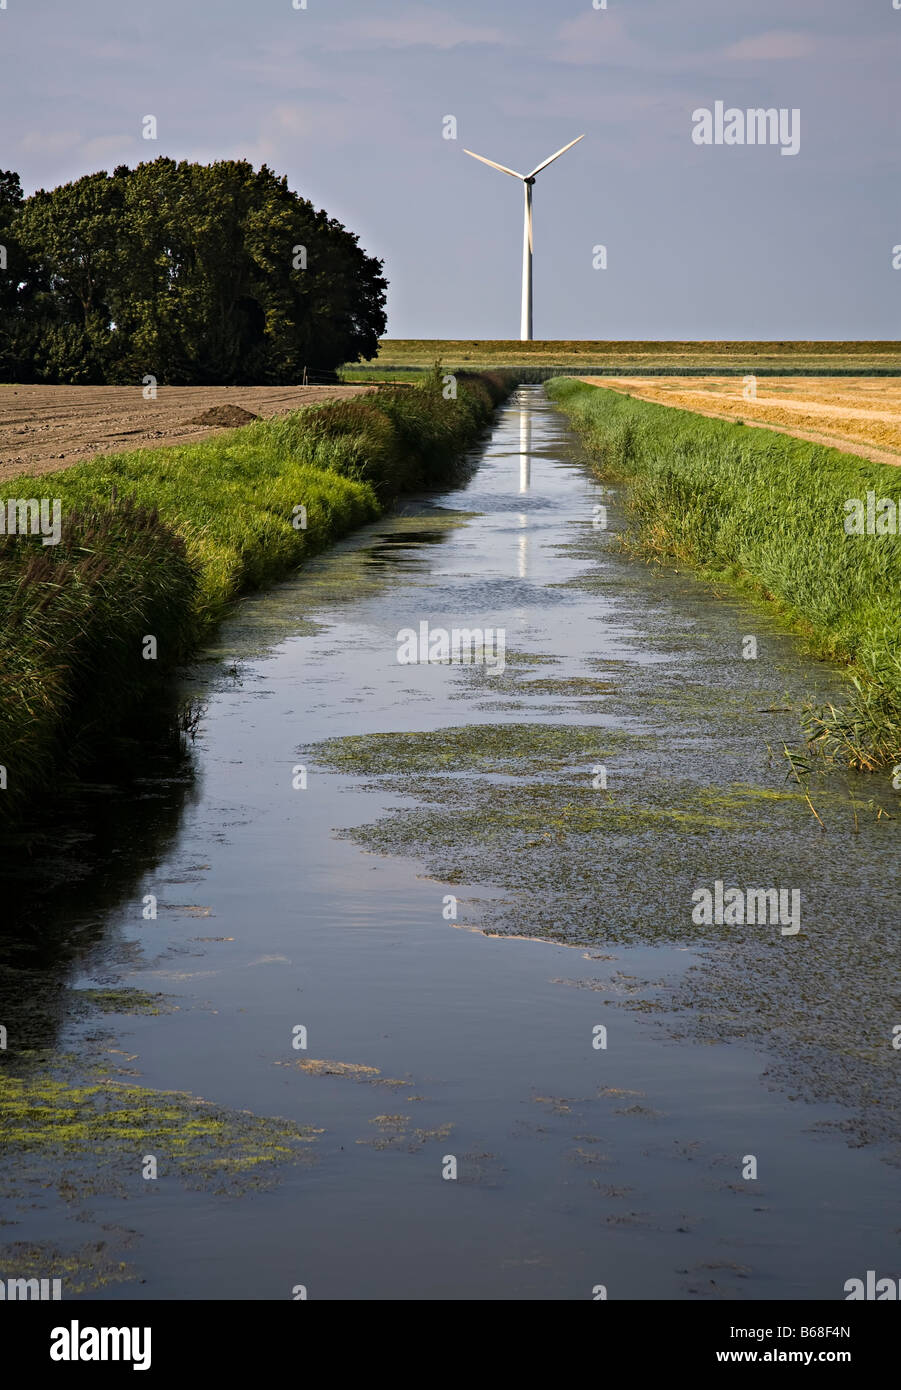 Wind turbine and irrigation canal Netherlands Stock Photo